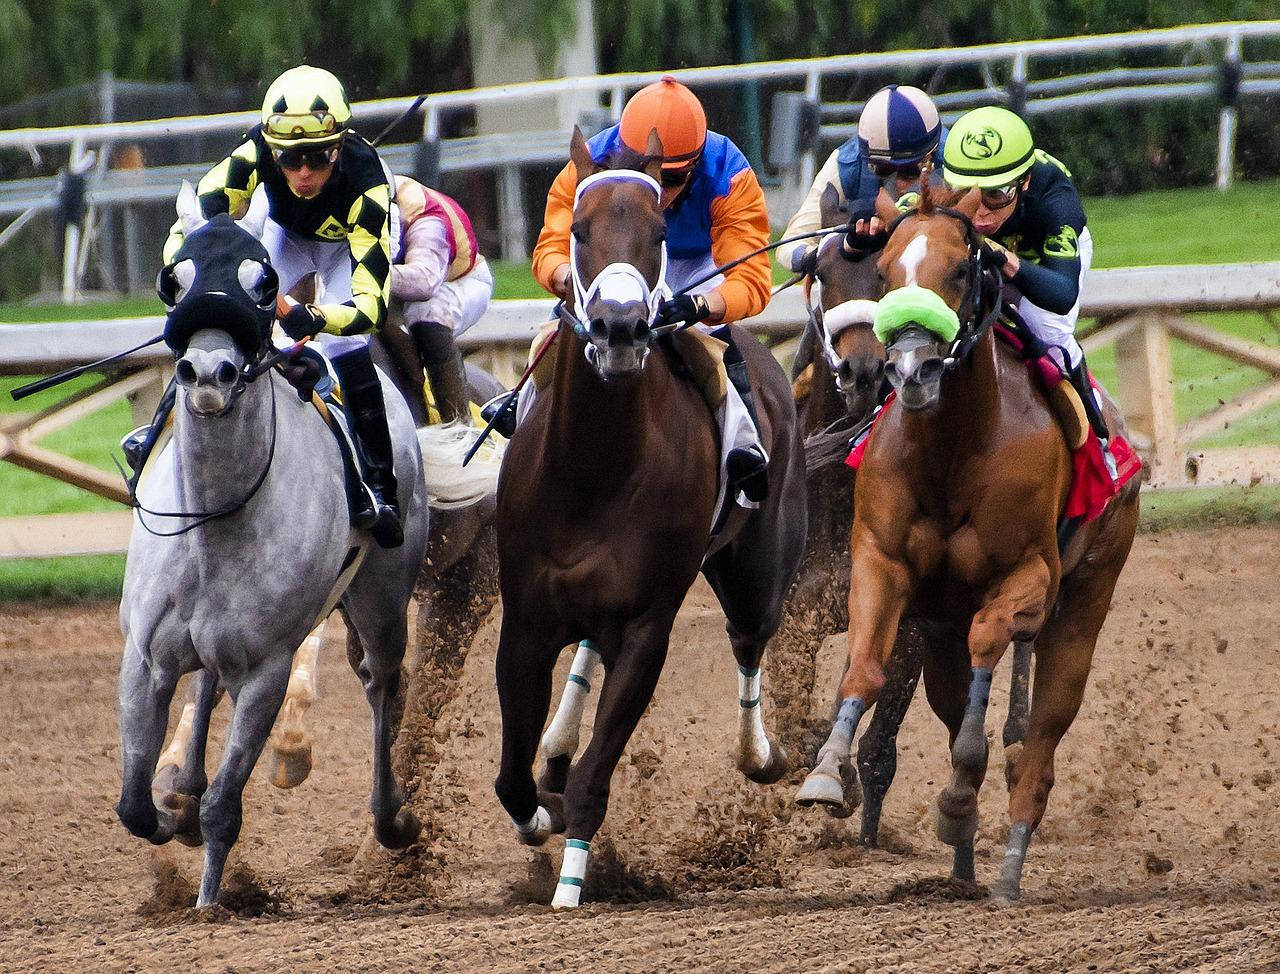 Intense Horse Racing Action at the Kentucky Derby Wallpaper